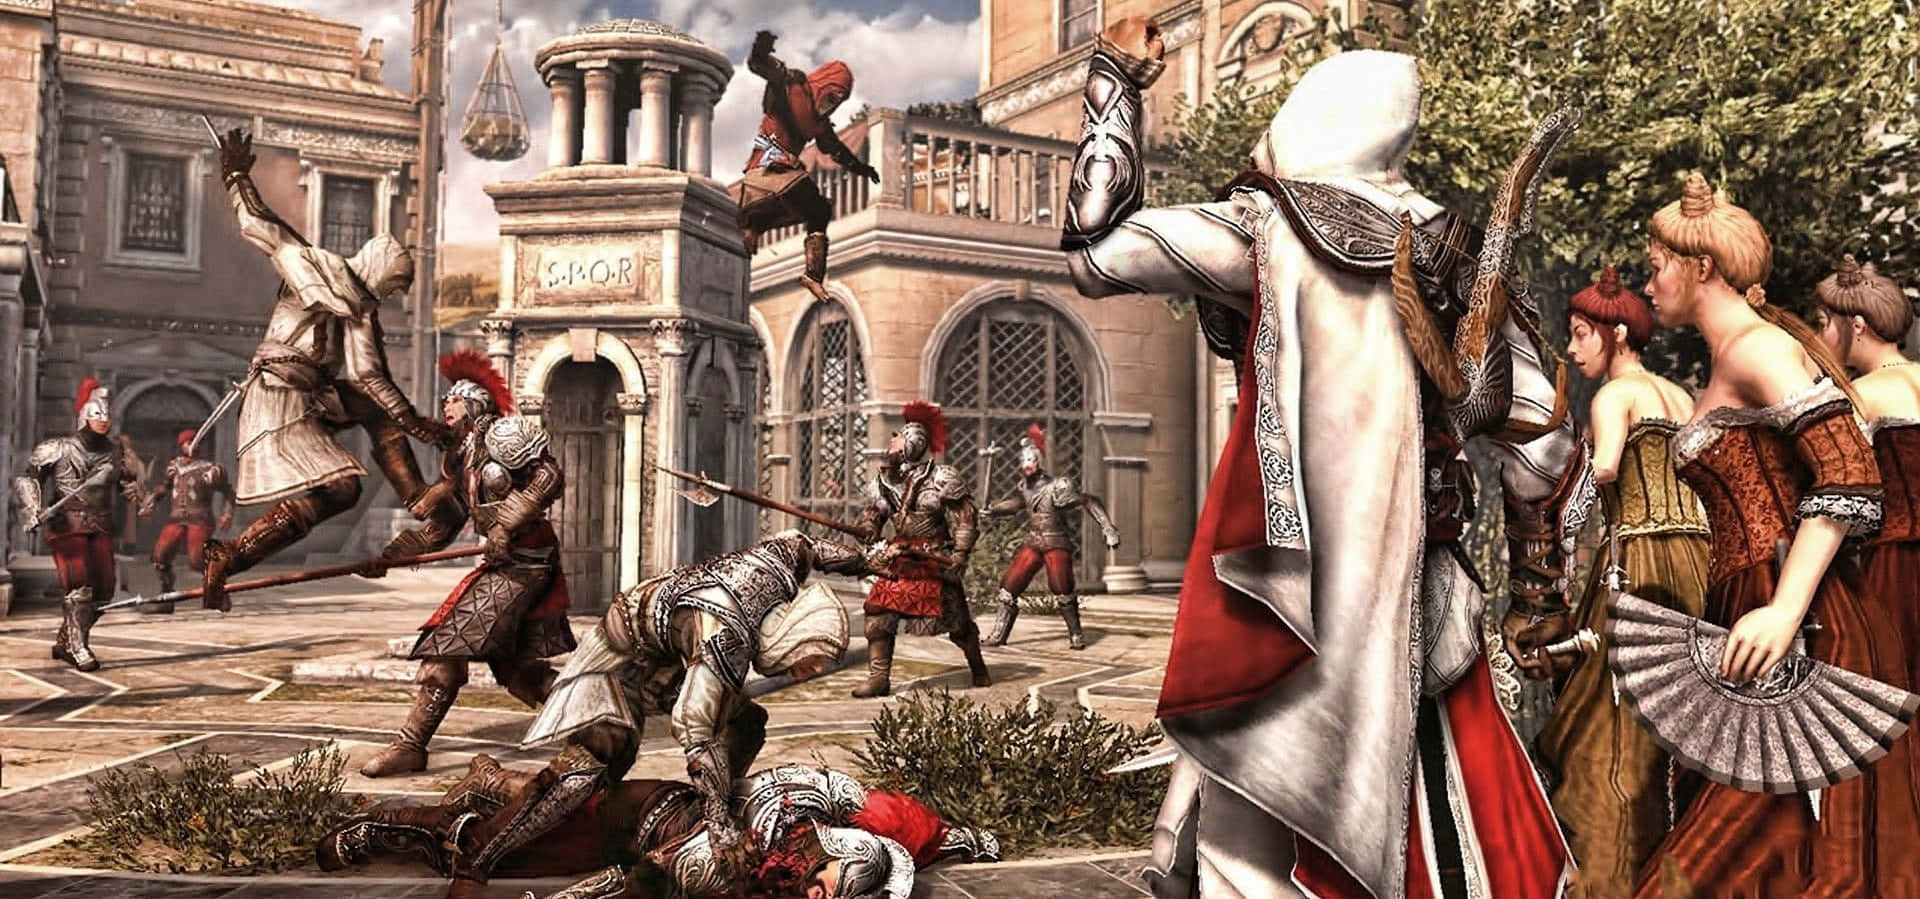 Assassin's Creed Brotherhood - Ezio and the Brotherhood in Action Wallpaper